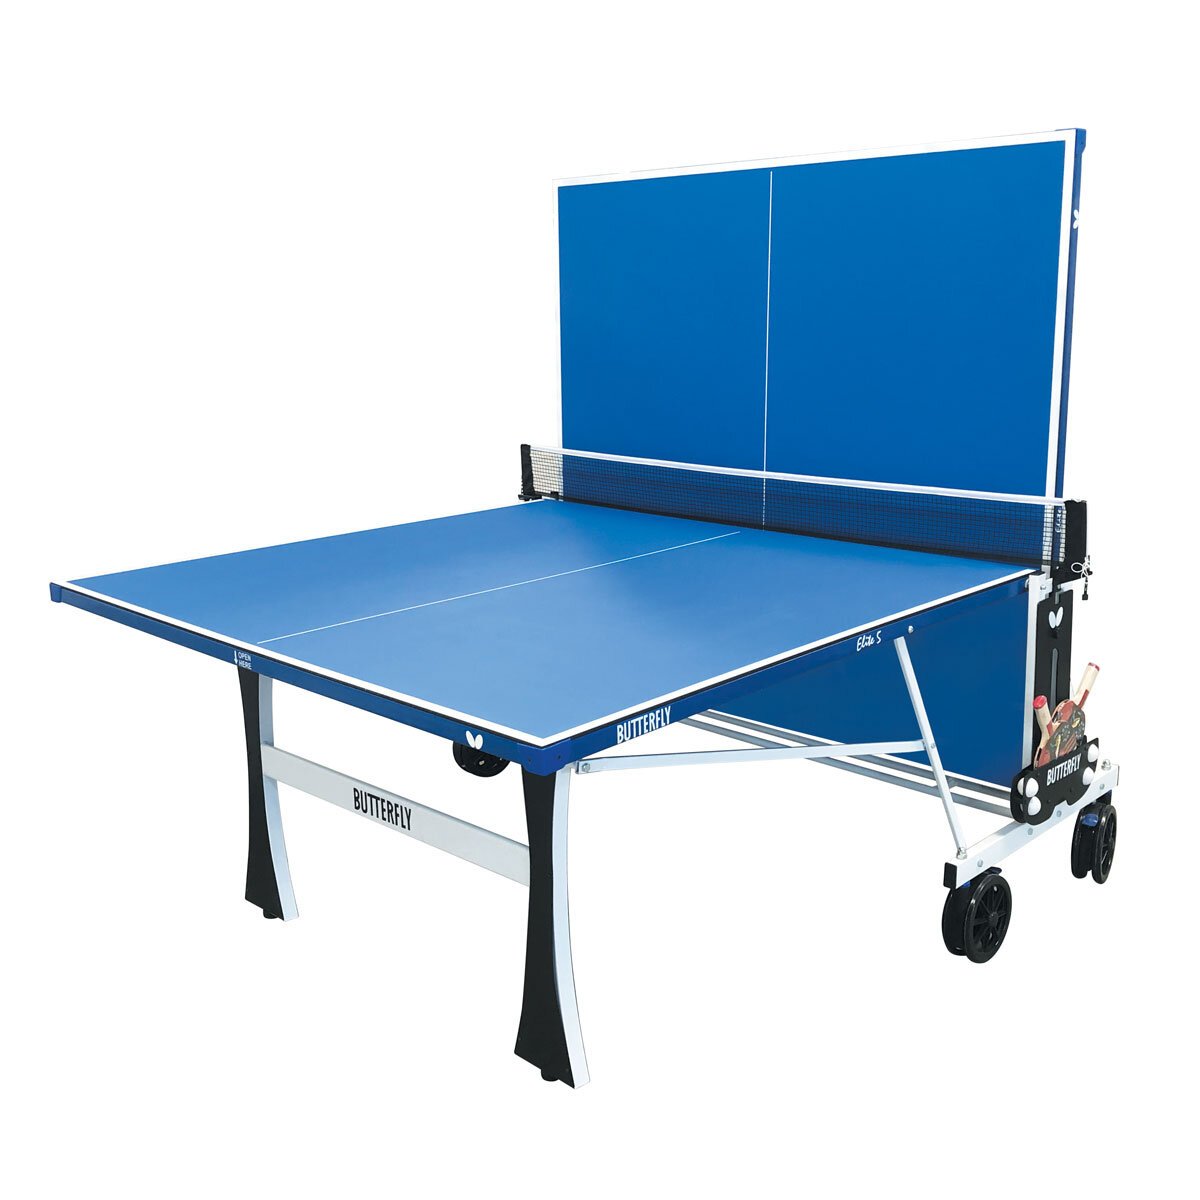 Butterfly Elite 5 Outdoor Table Tennis Table